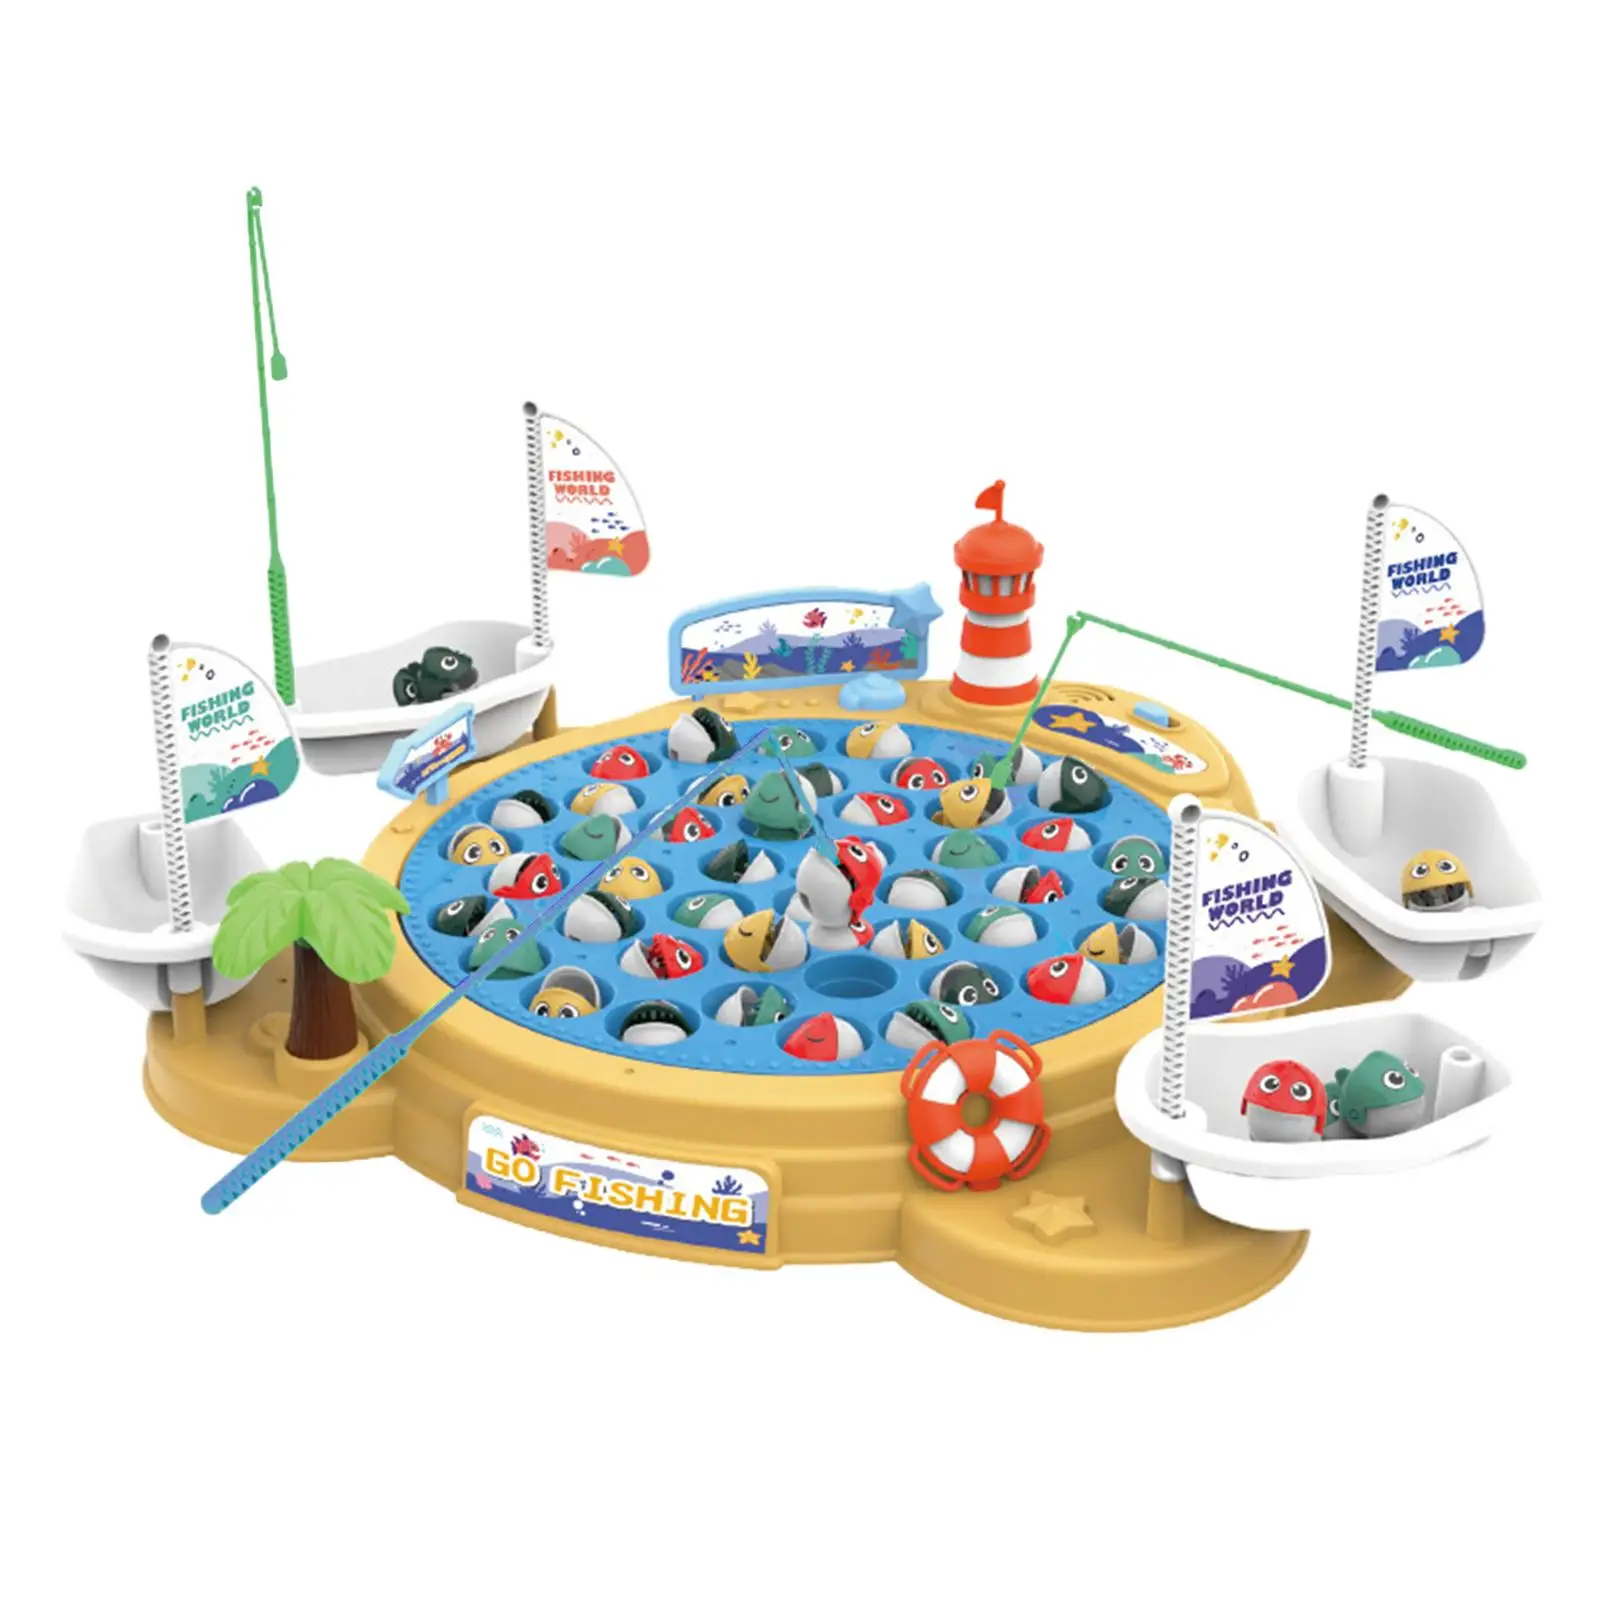 Rotating Fishing Game Toy Novelty including Fishes and Fishing Poles Rotating Board Game for Children Kids Girls Birthday Gifts